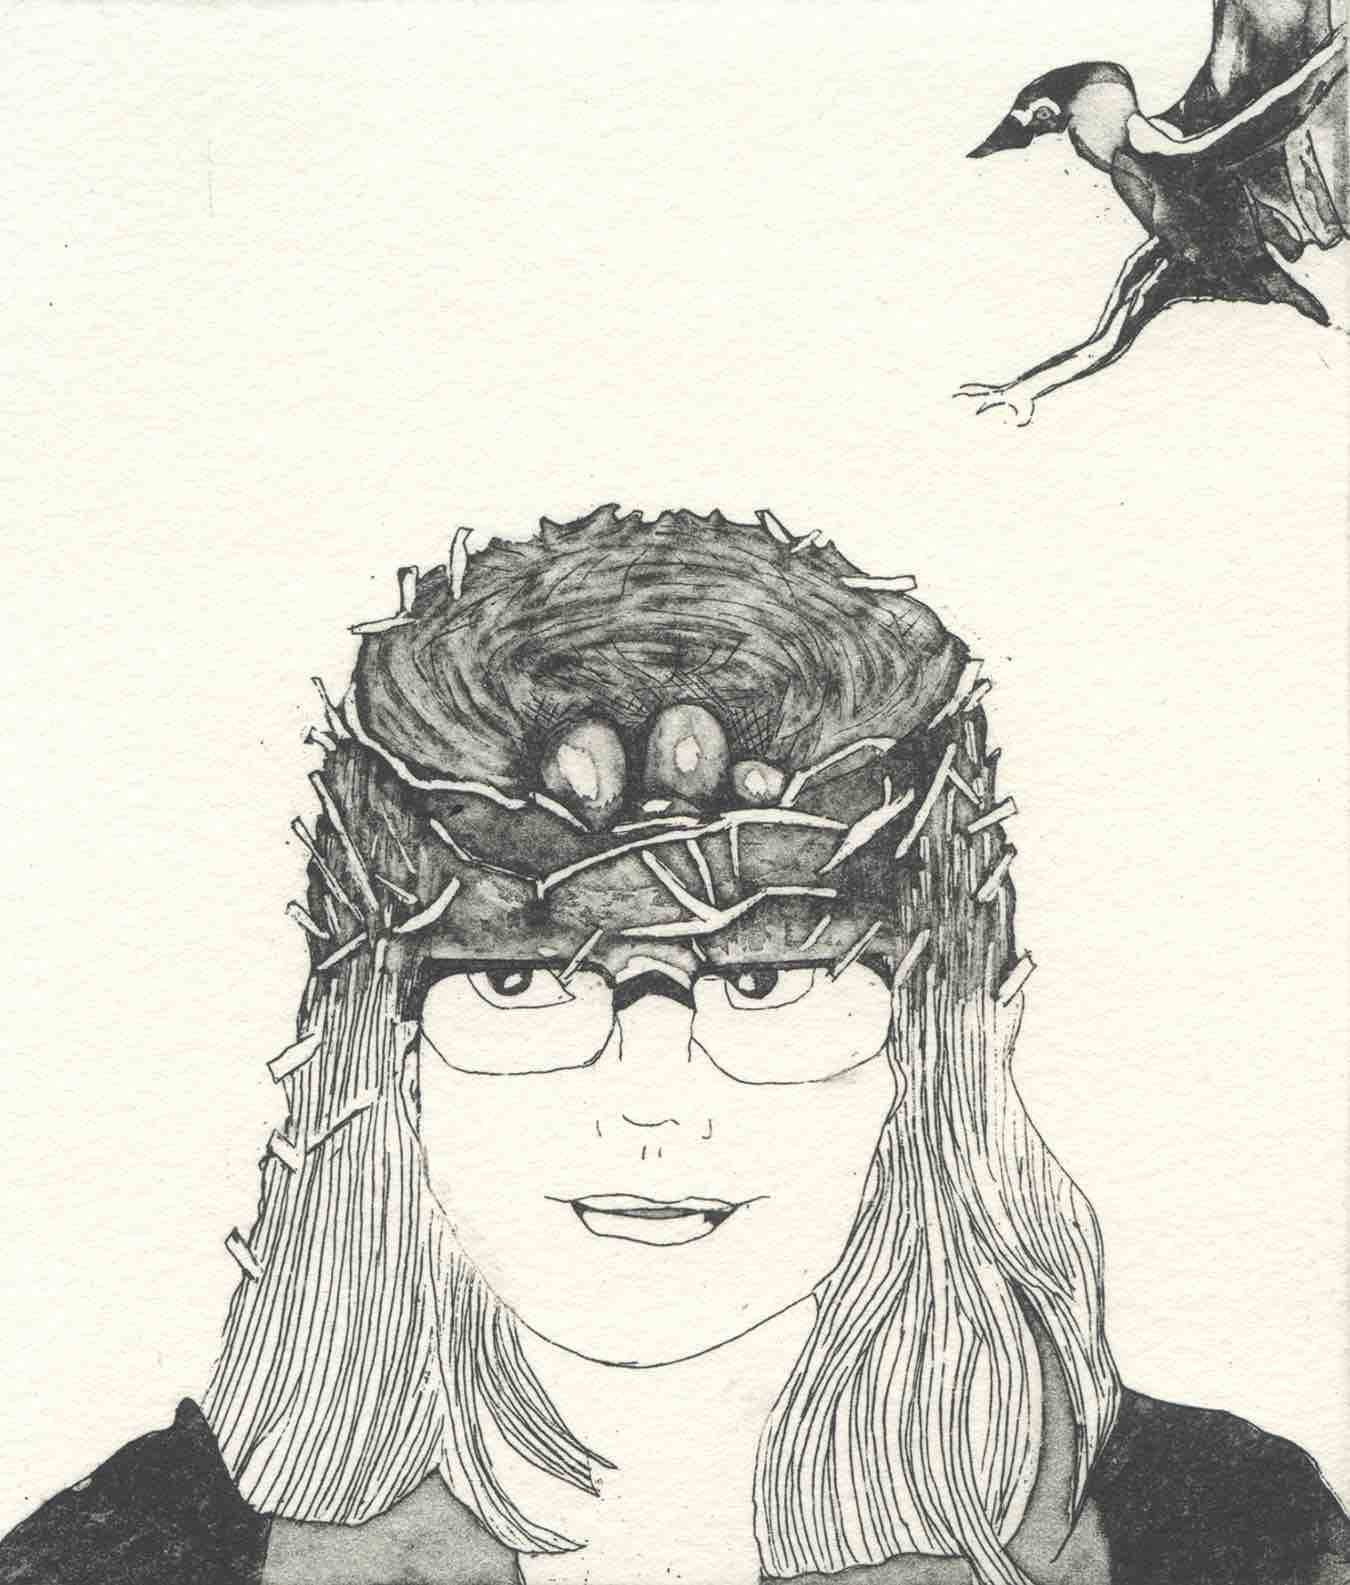 This is a print of a black on cream line drawing. A girl with shoulder-length plain hair looks out and to the left, with a contemplative look. Atop her head is a bird's nest, with 3 eggs. From the top corner of the image, a bird is in flight, wings stretched back and feet thrust forward, about to land on the nest.